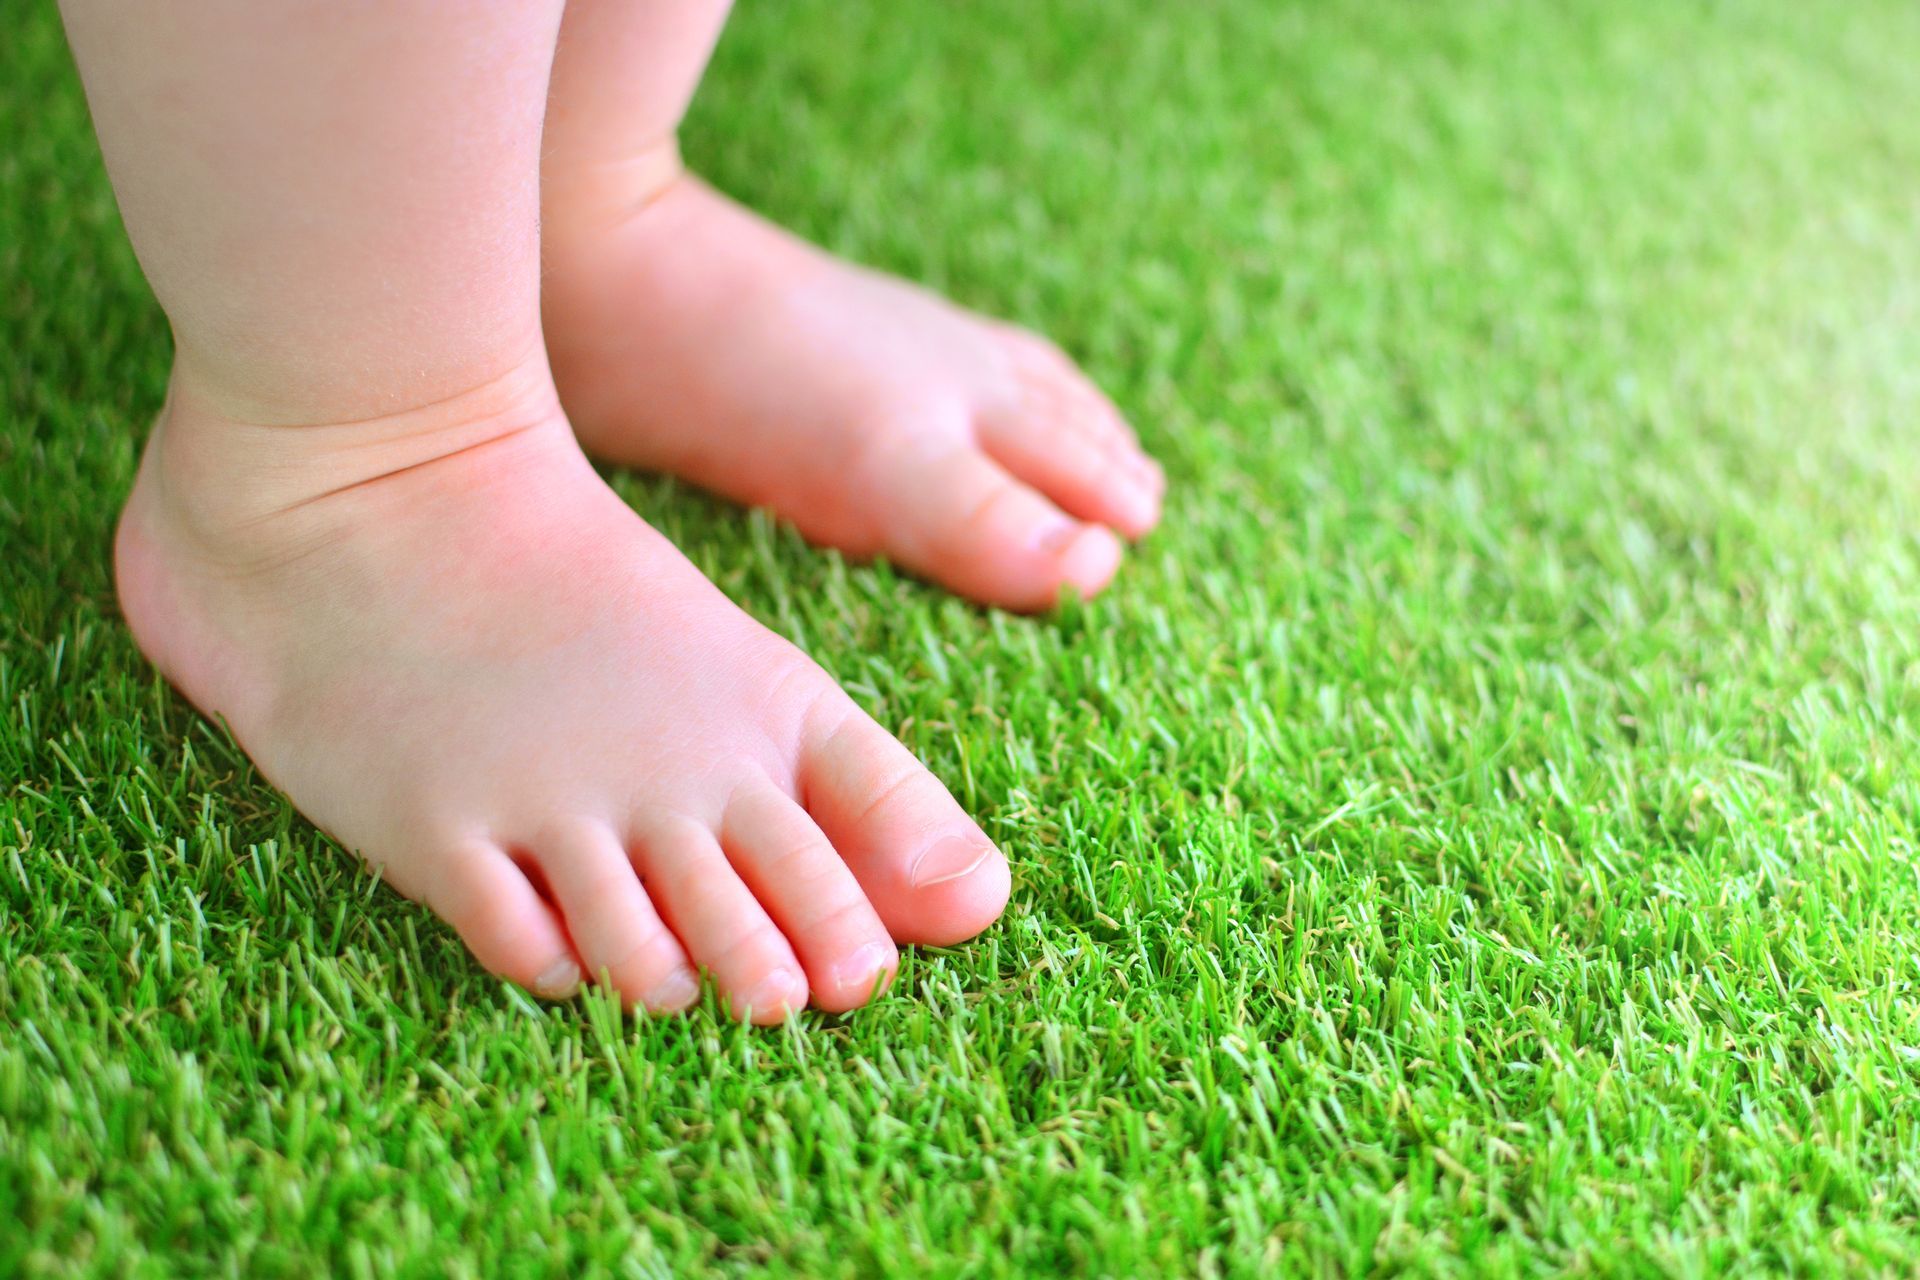 Benefits of installing turf: Feet of a baby on a green artificial turf